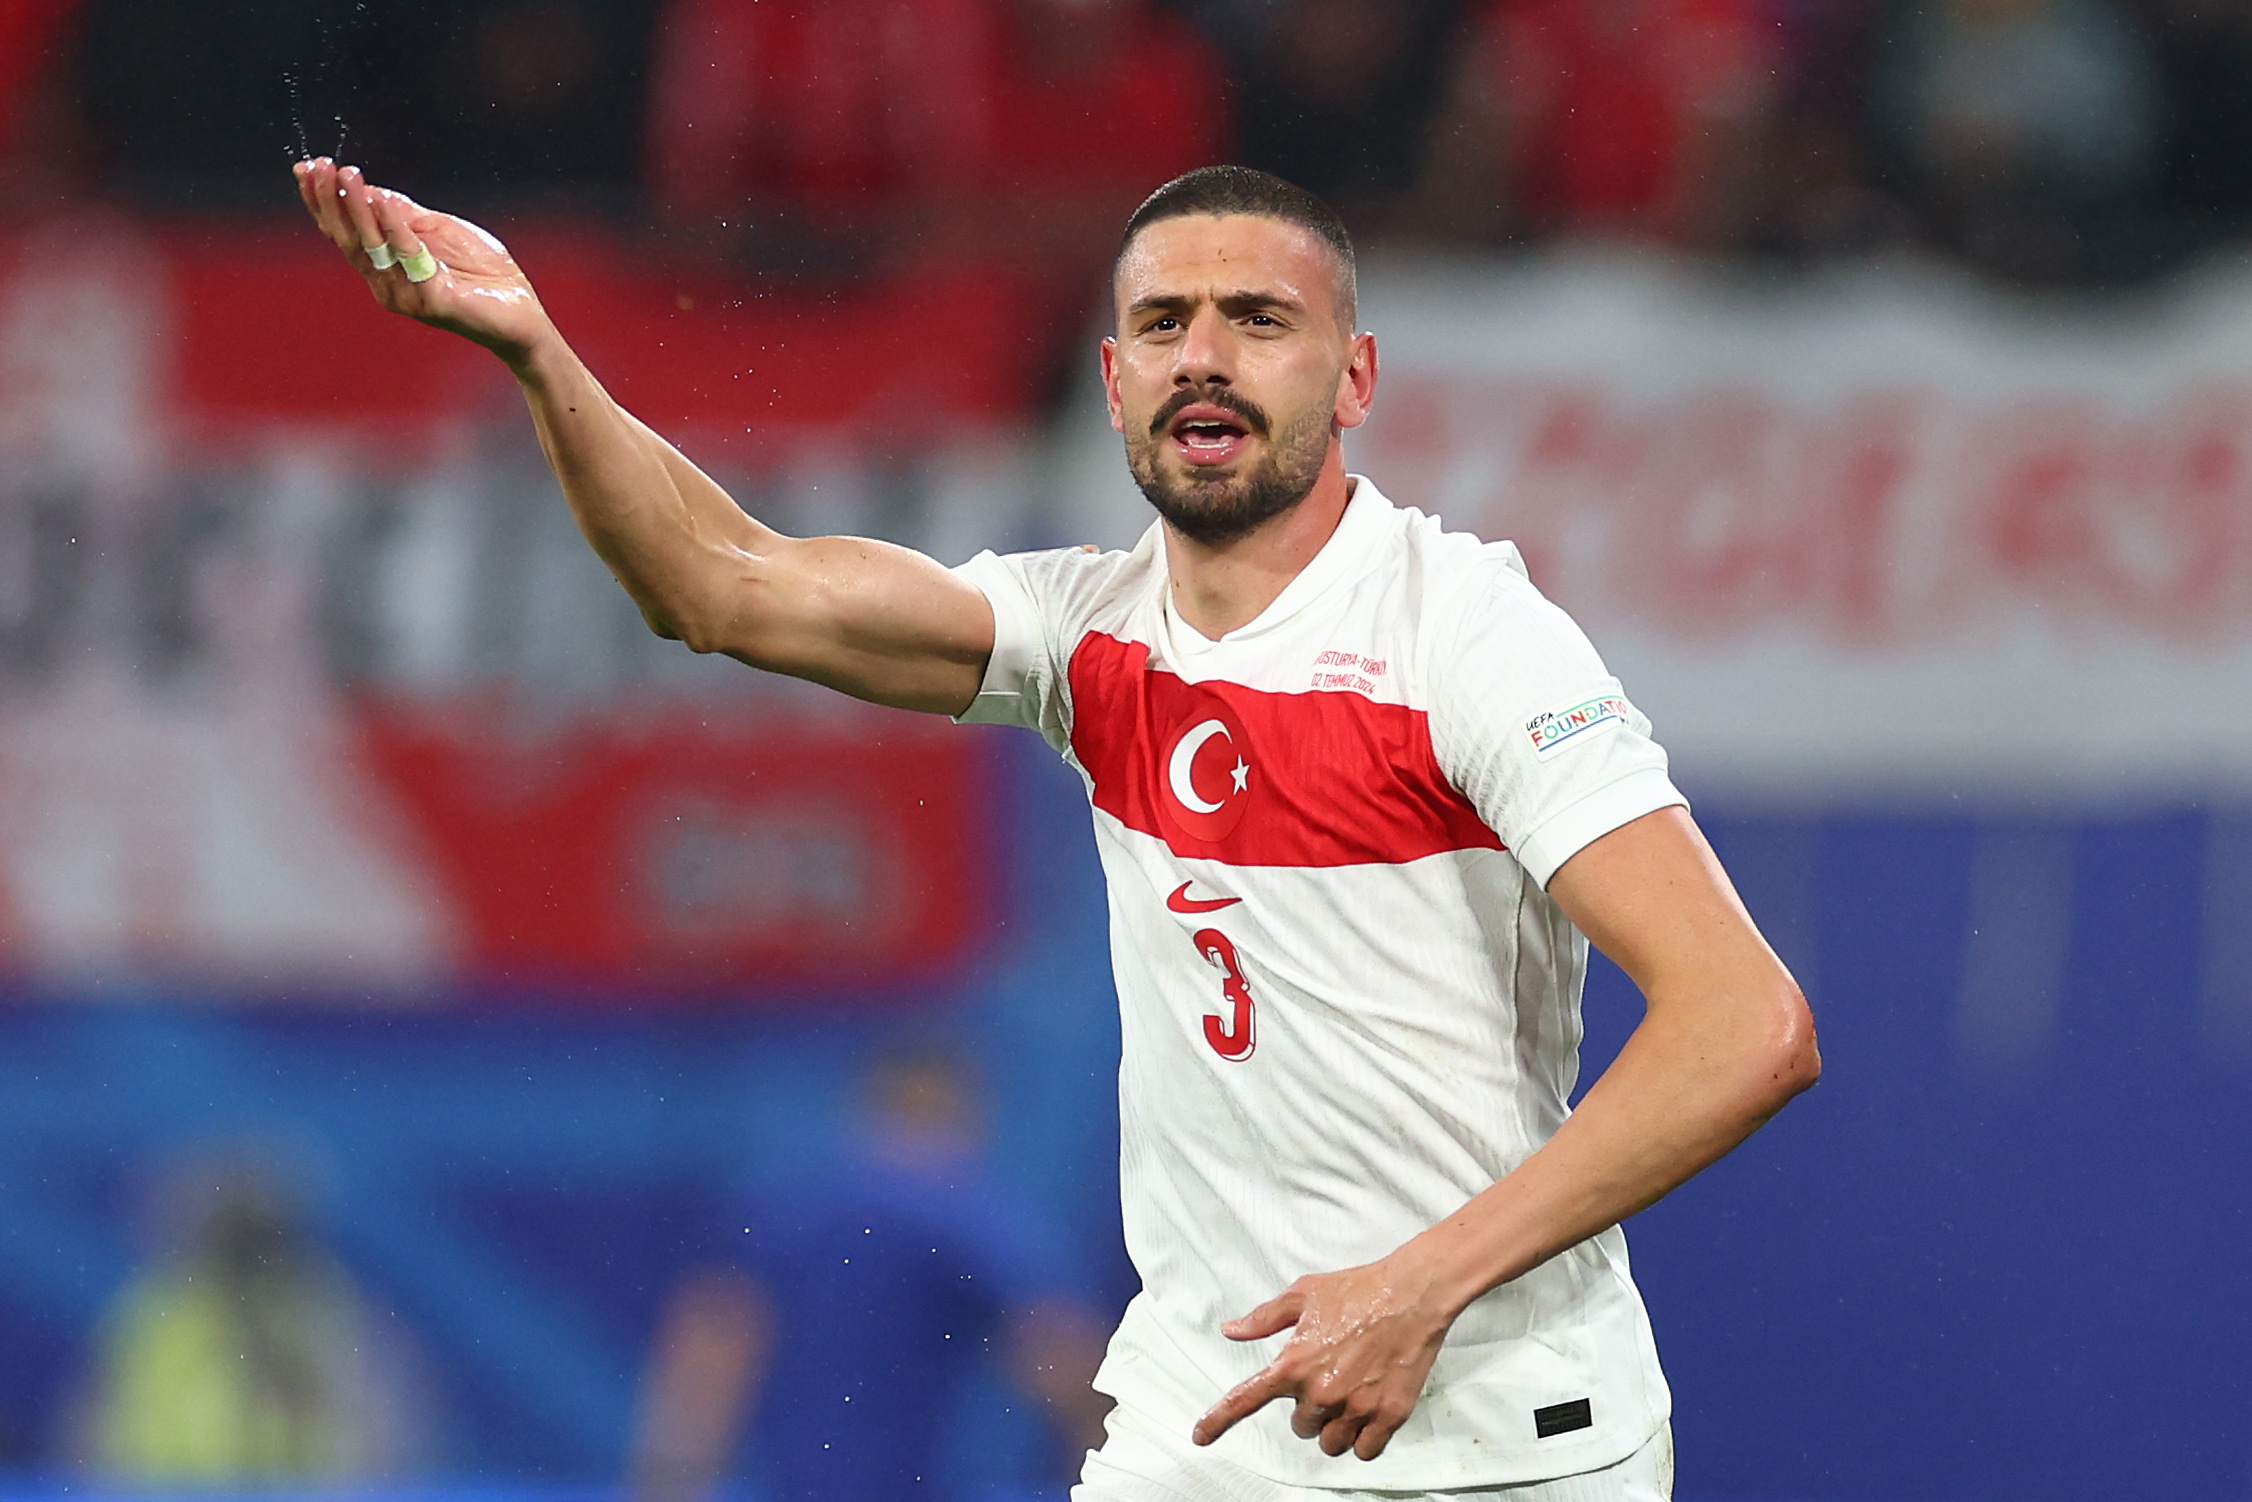 Merih Demiral scored twice to see Turkey through to the quarter-finals